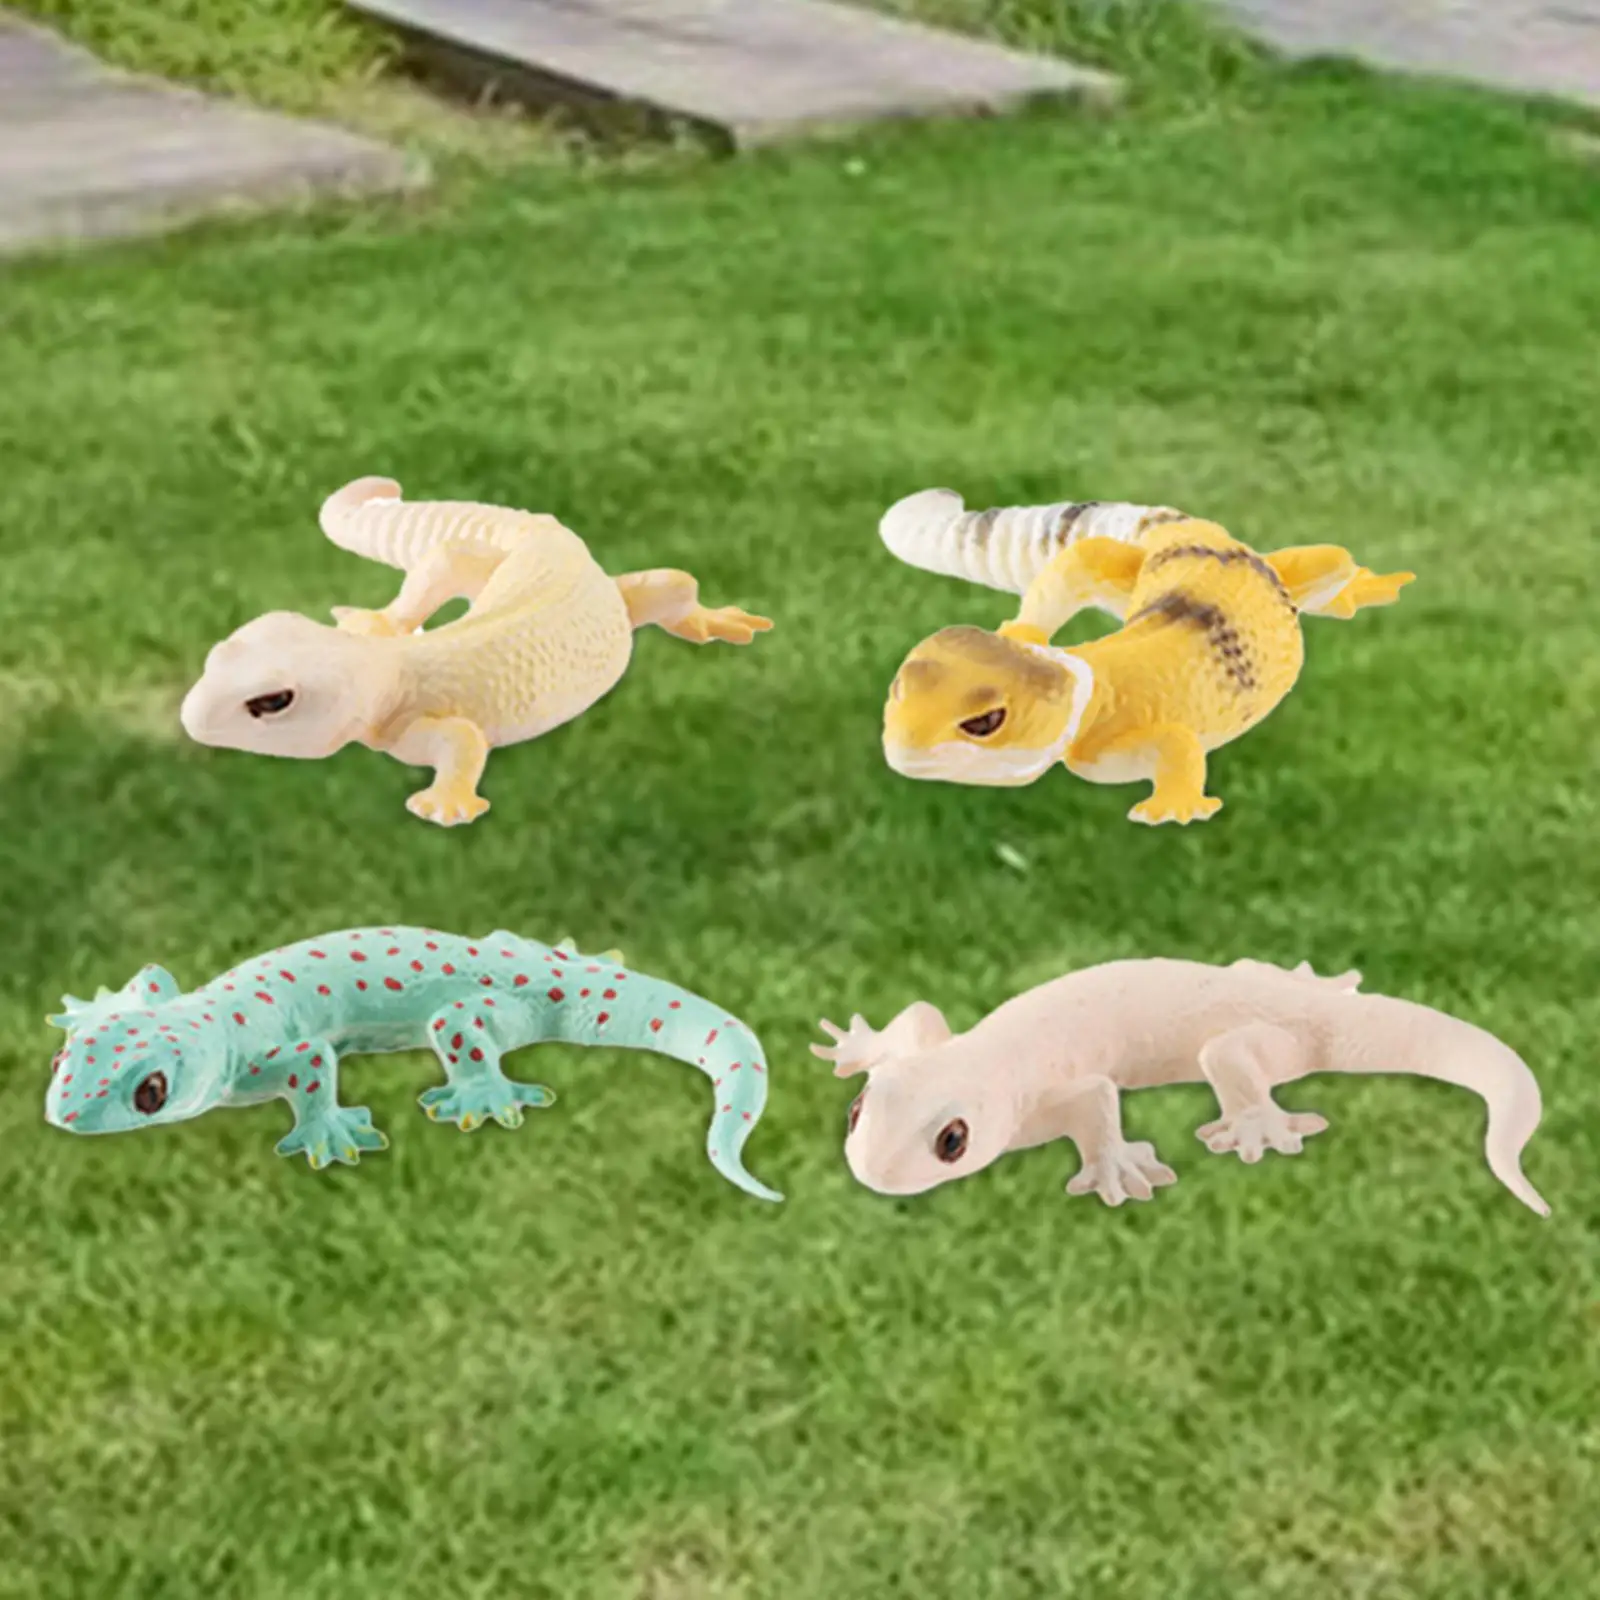 4Pcs Animals Model Decorations Cognition Toy Gifts Lizards Toy for DIY Projects